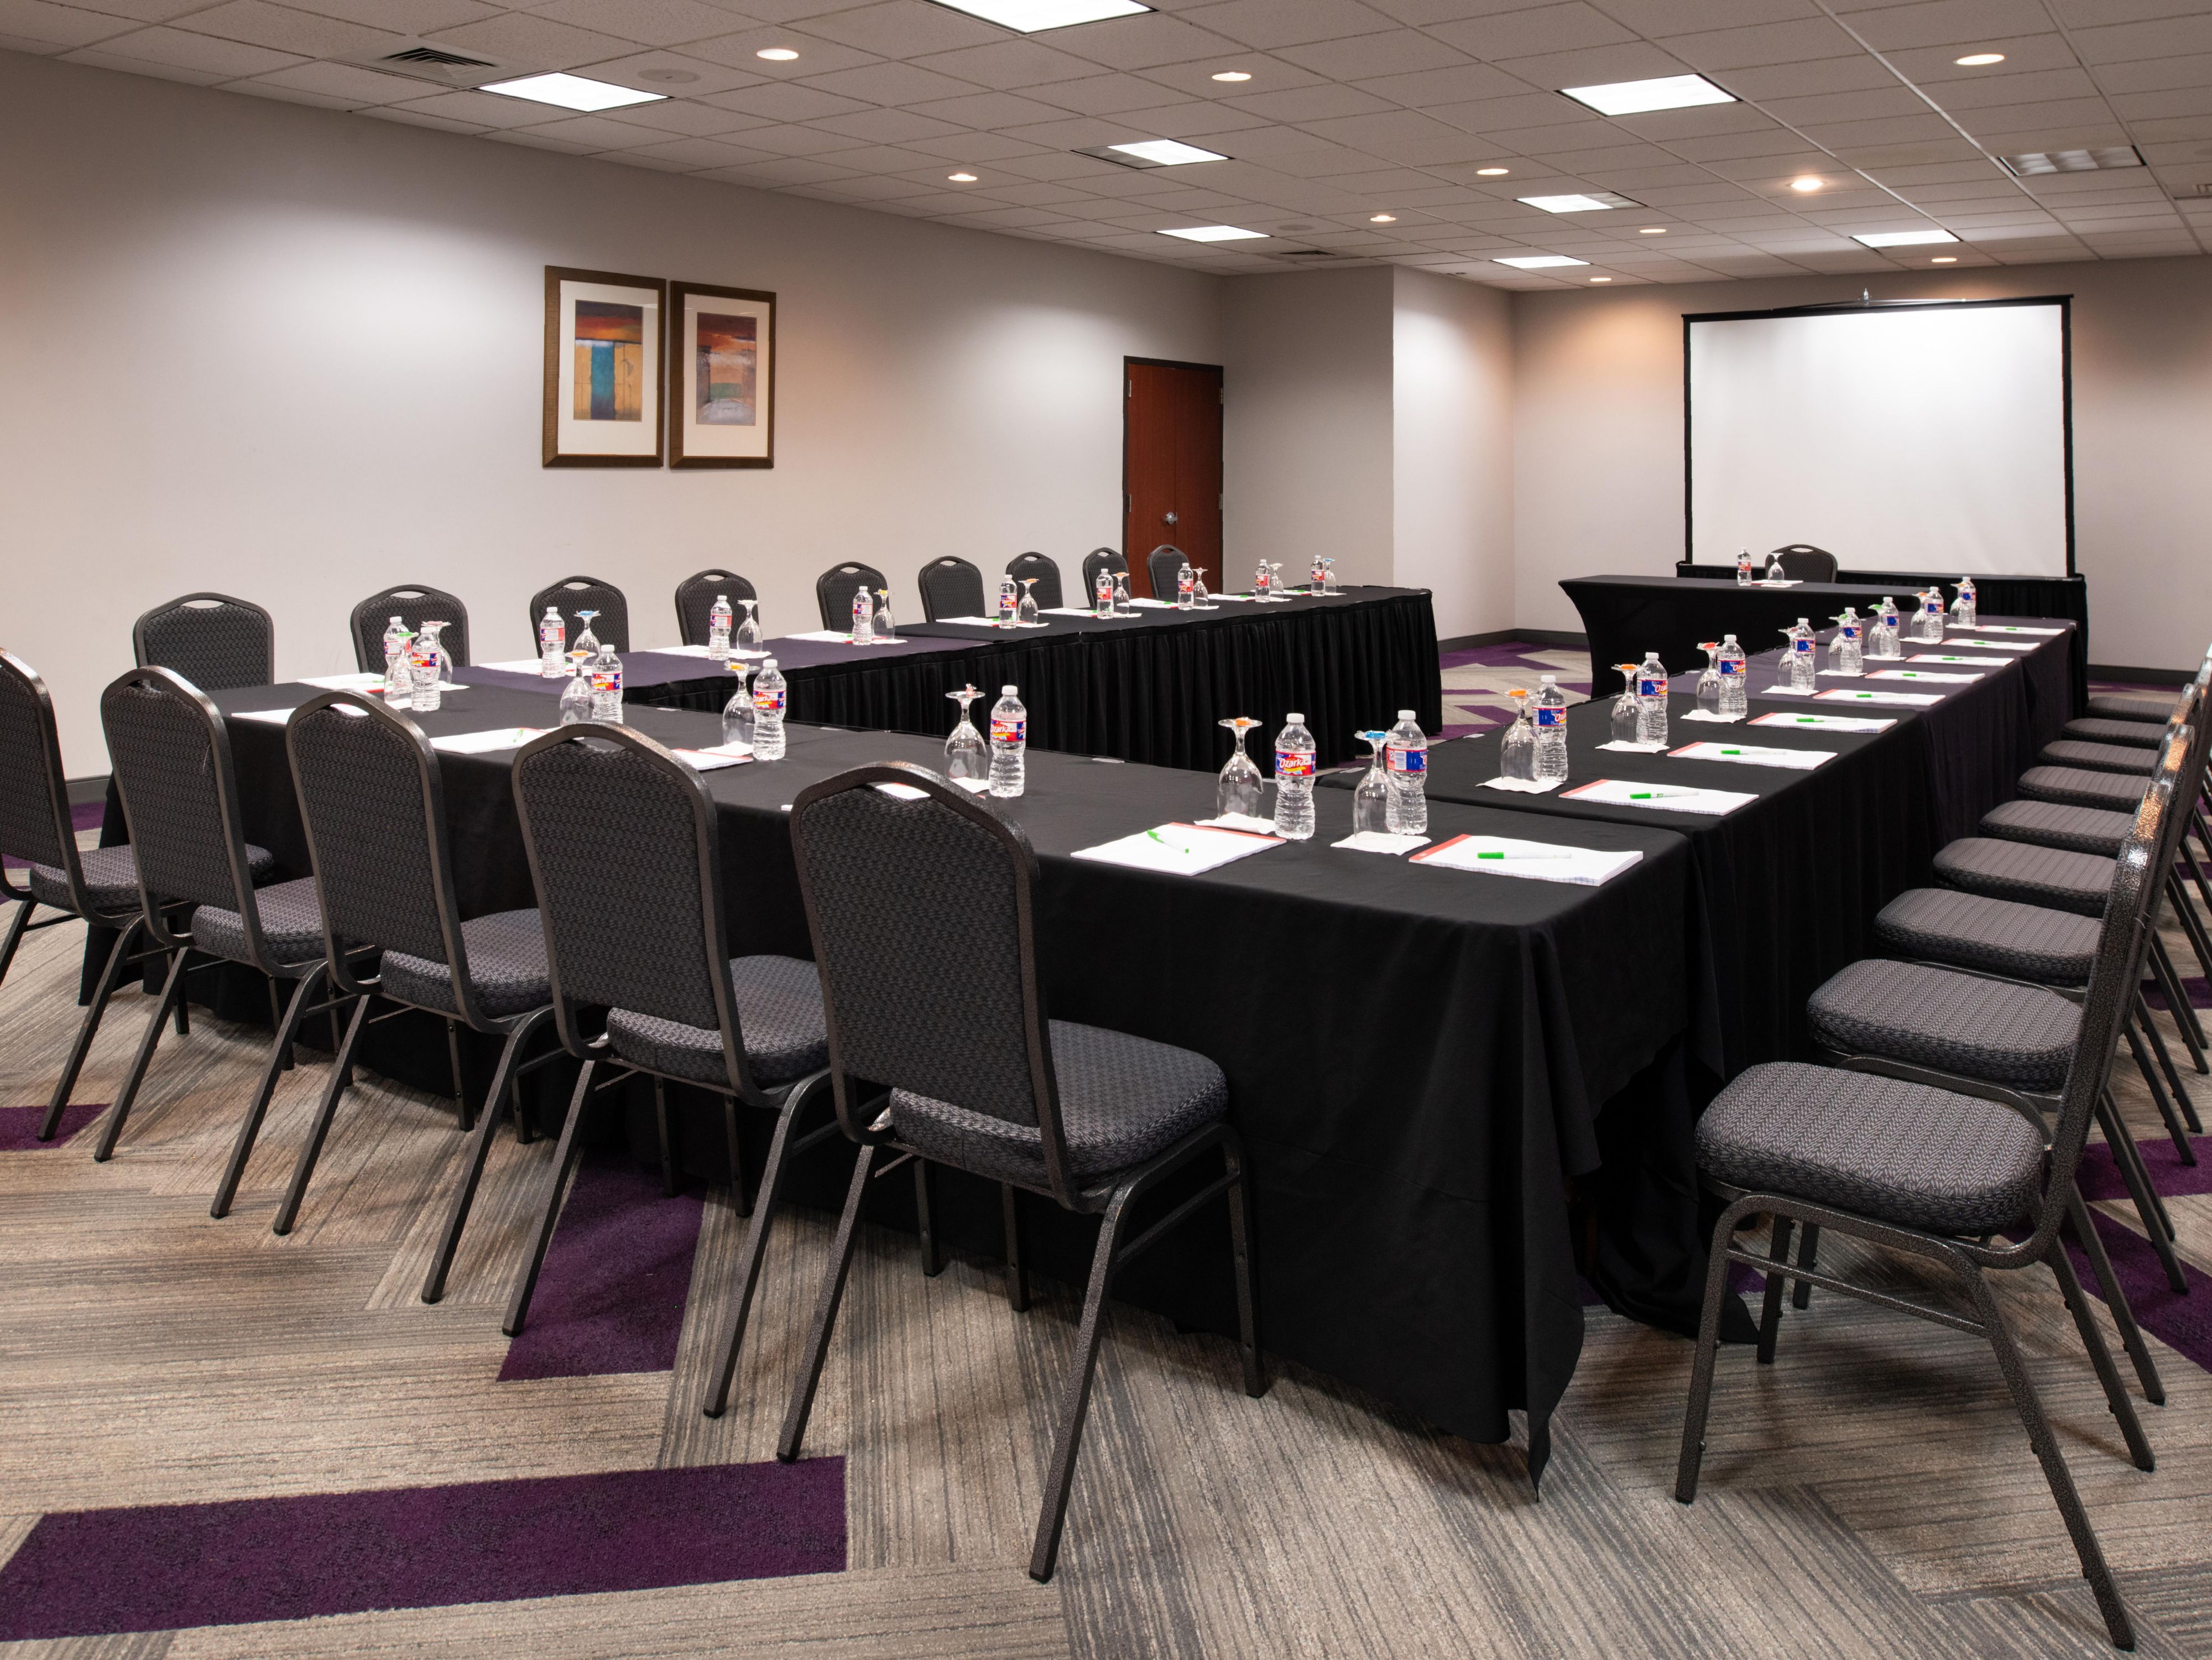 Our 22,000 sq ft convention centers offers everything you need to host your next meeting or convention.  Our convention center offers 16 meeting rooms ranging from 500 - 10,000 sq ft.  Our convention services & catering team is onsite and ready to assist you with your next meeting.